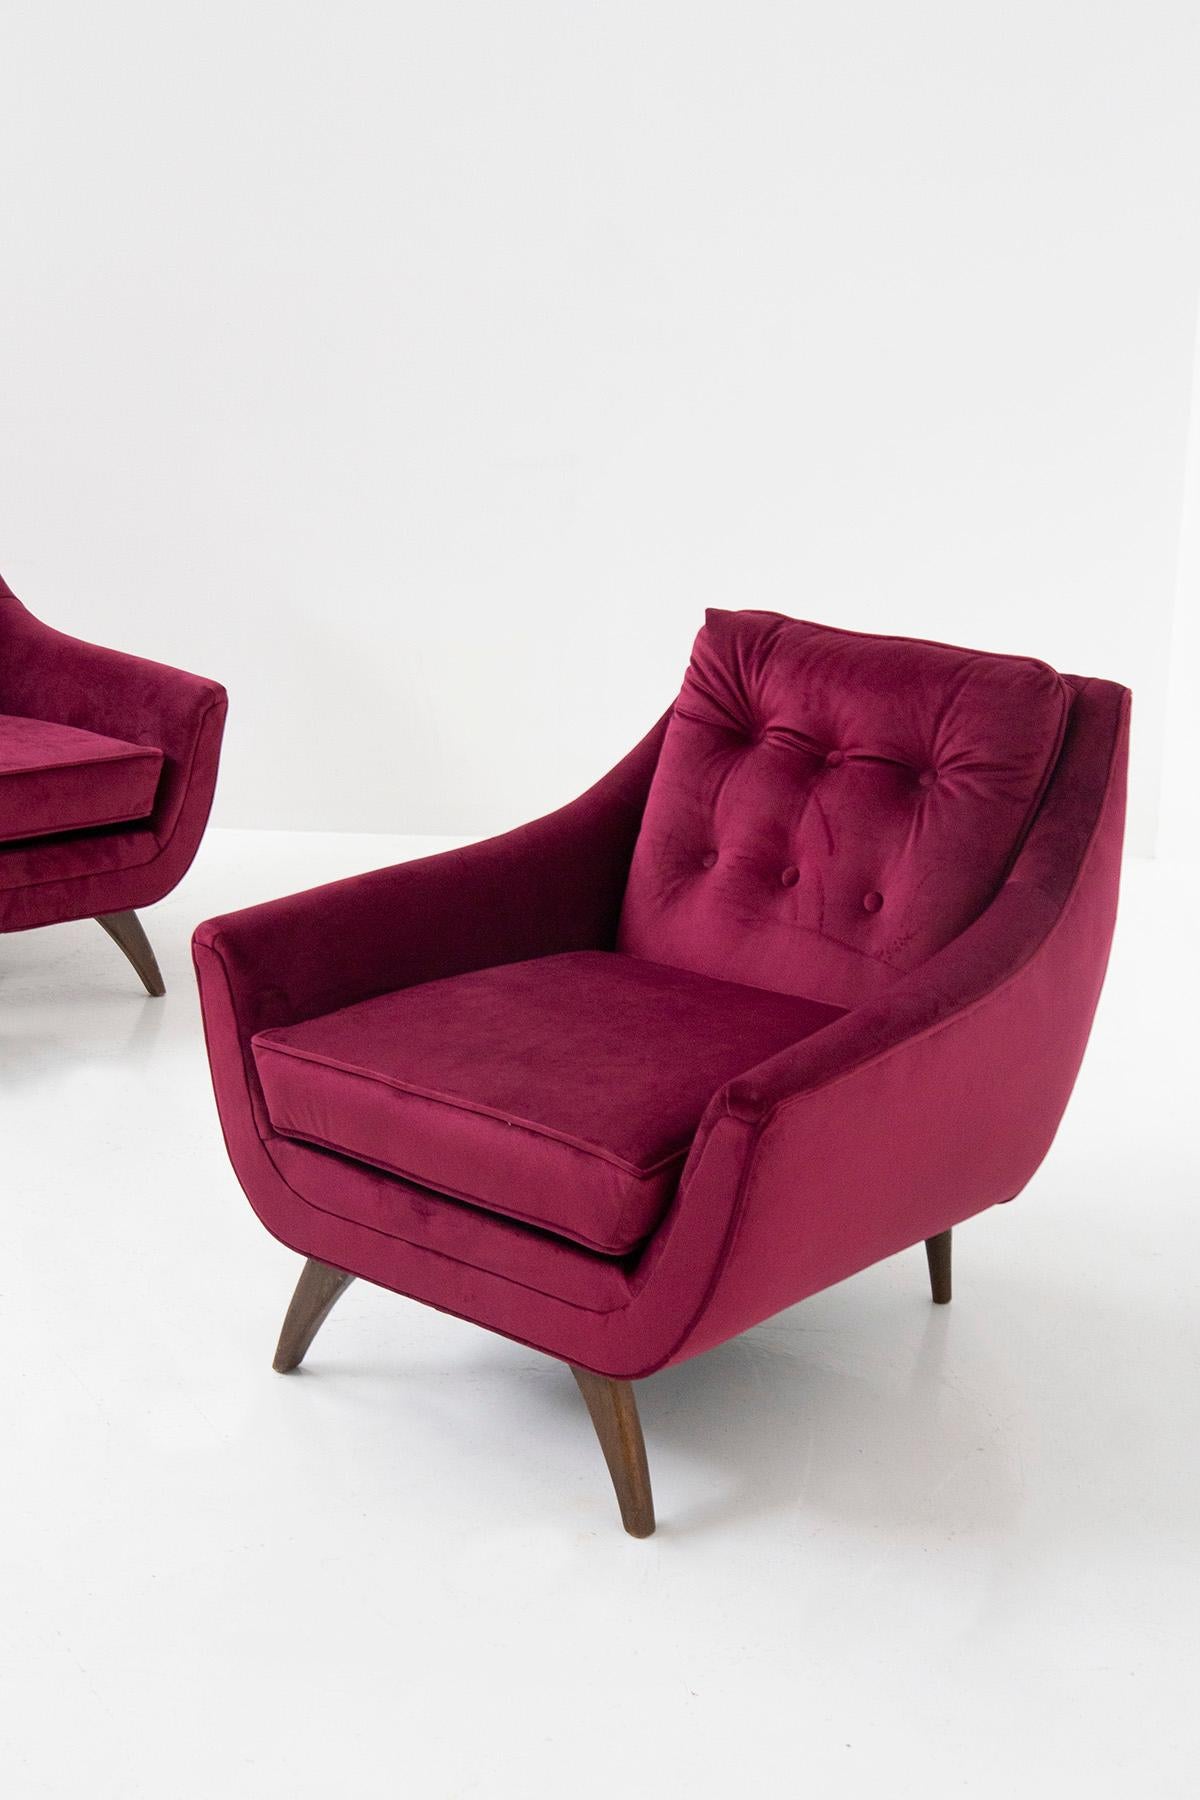 Adrian Pearsall Pair of Purple Armchairs in Velvet Him and Her For Sale 8